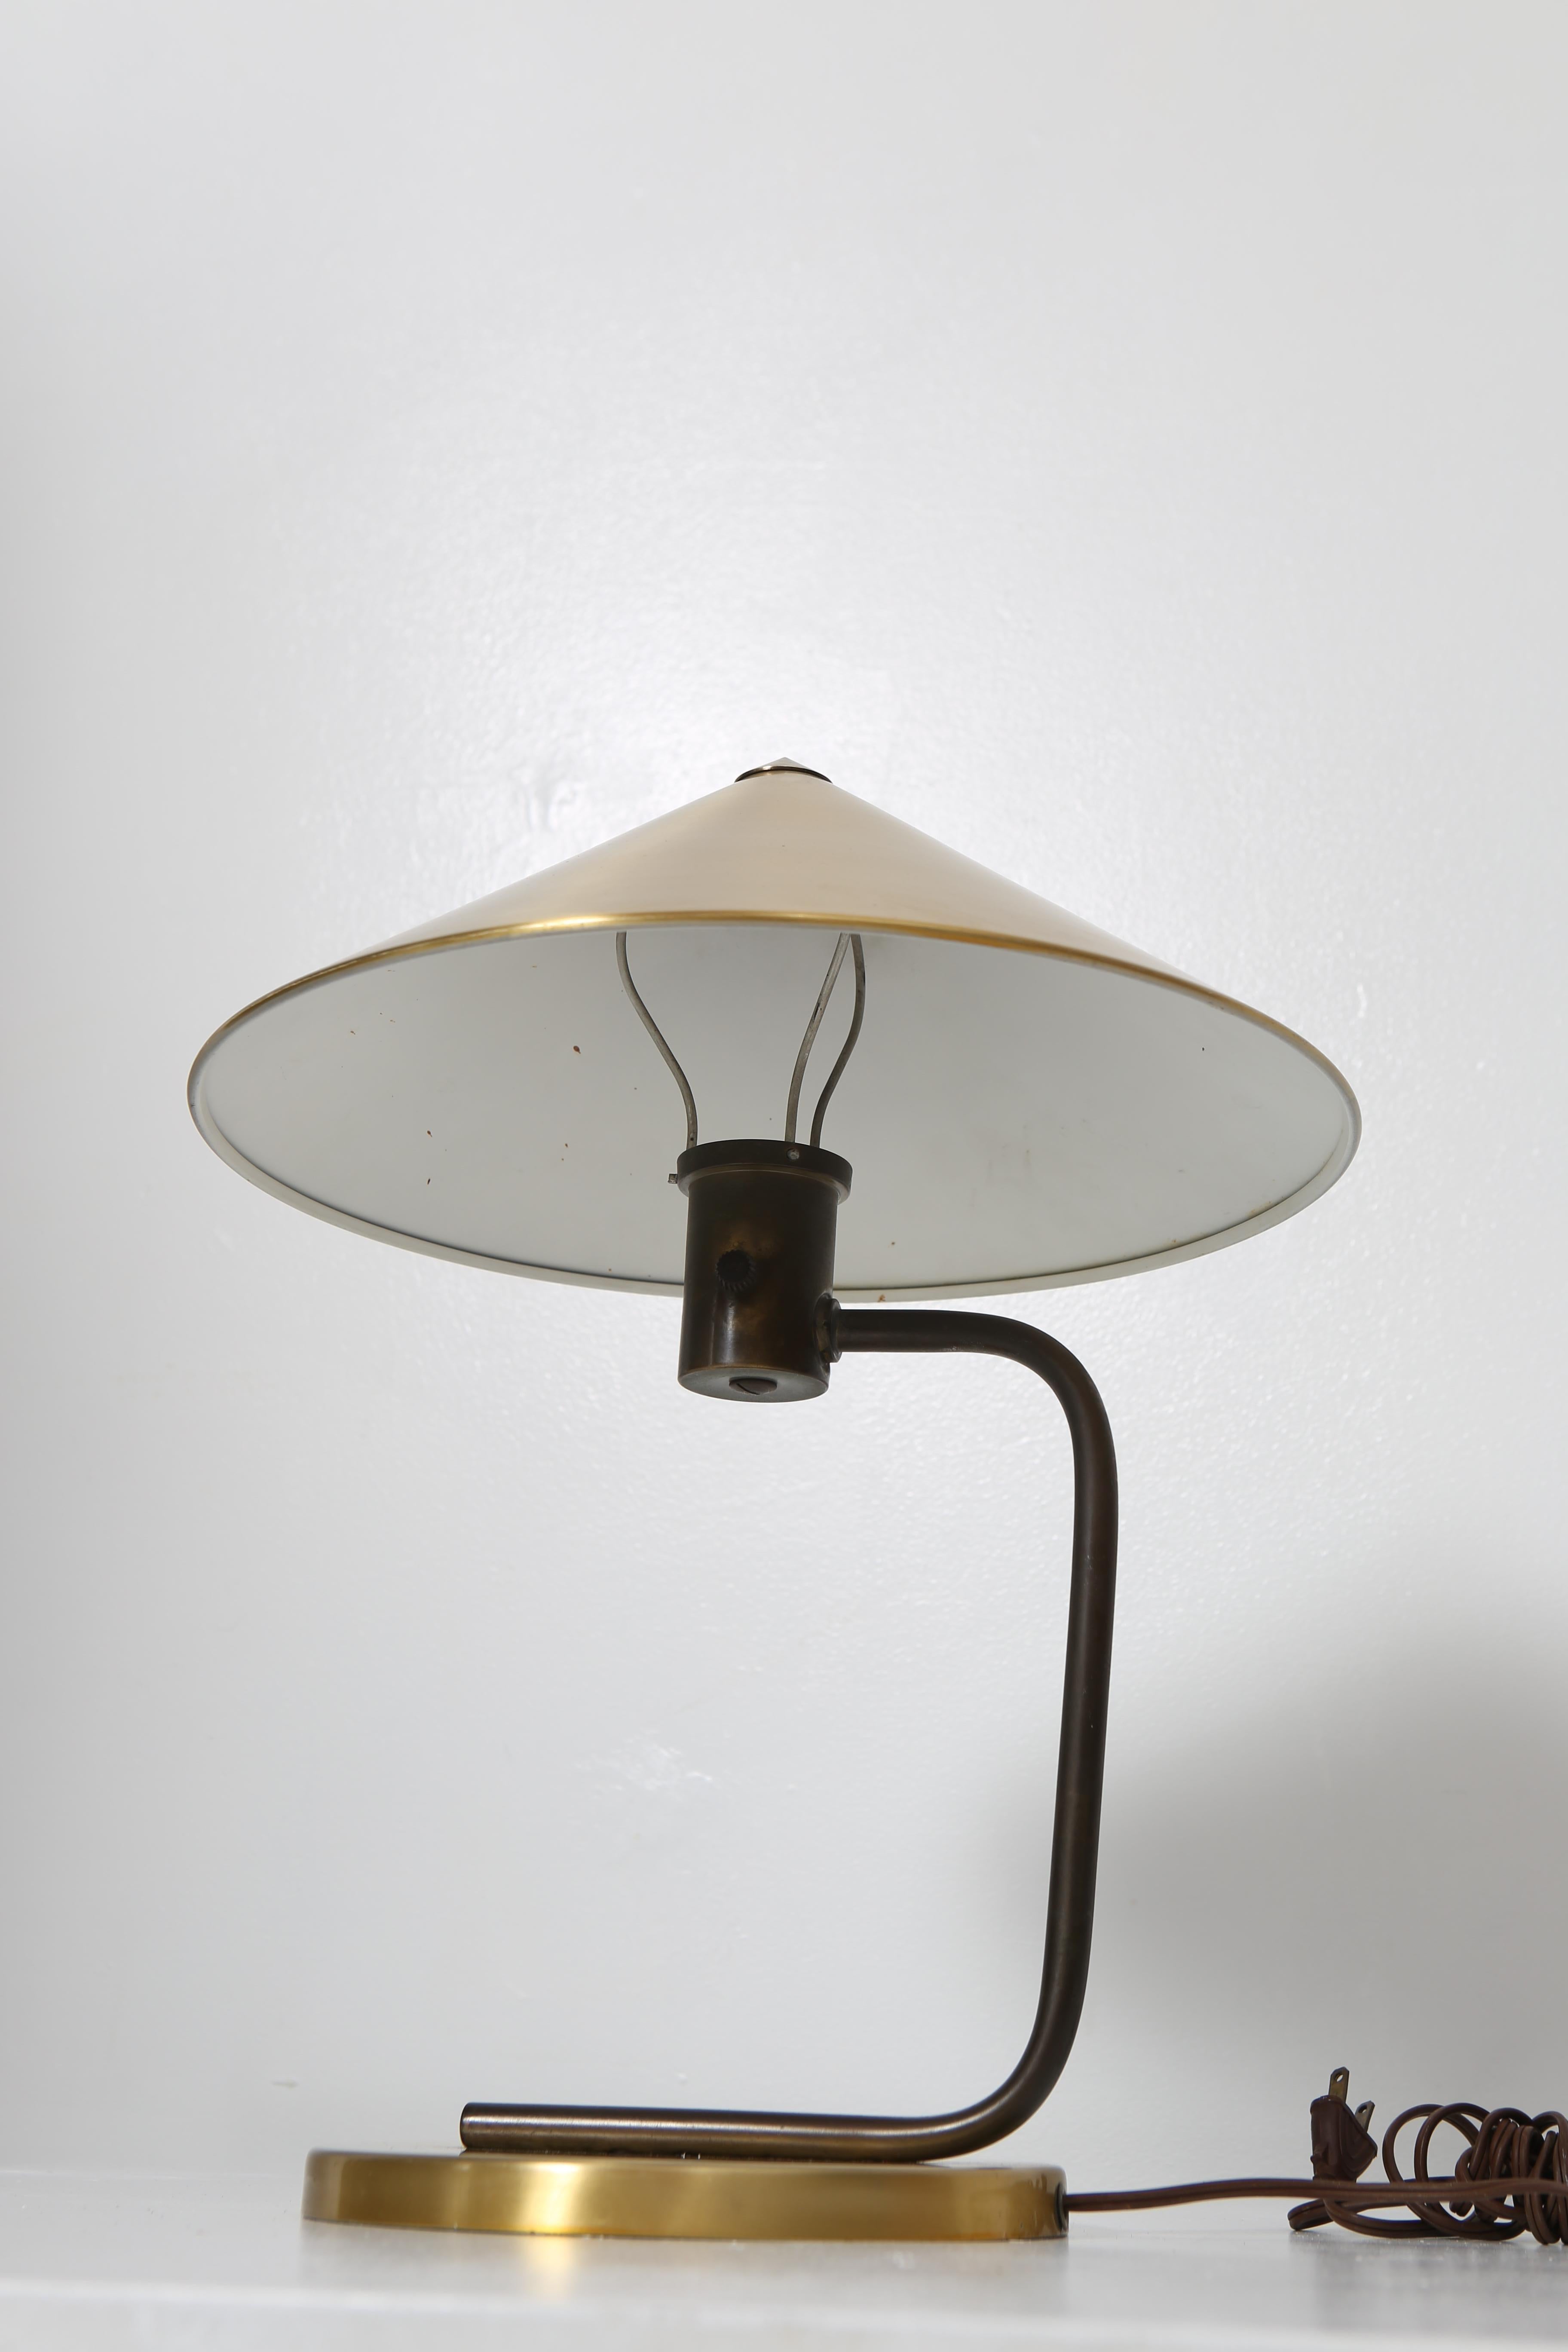 Fantastic early lamp by Swedish-born designer, Kurt Versen. In brass with plated aluminum shade. Excellent condition. Rare lamp. United States, 1930s. 18” tall.